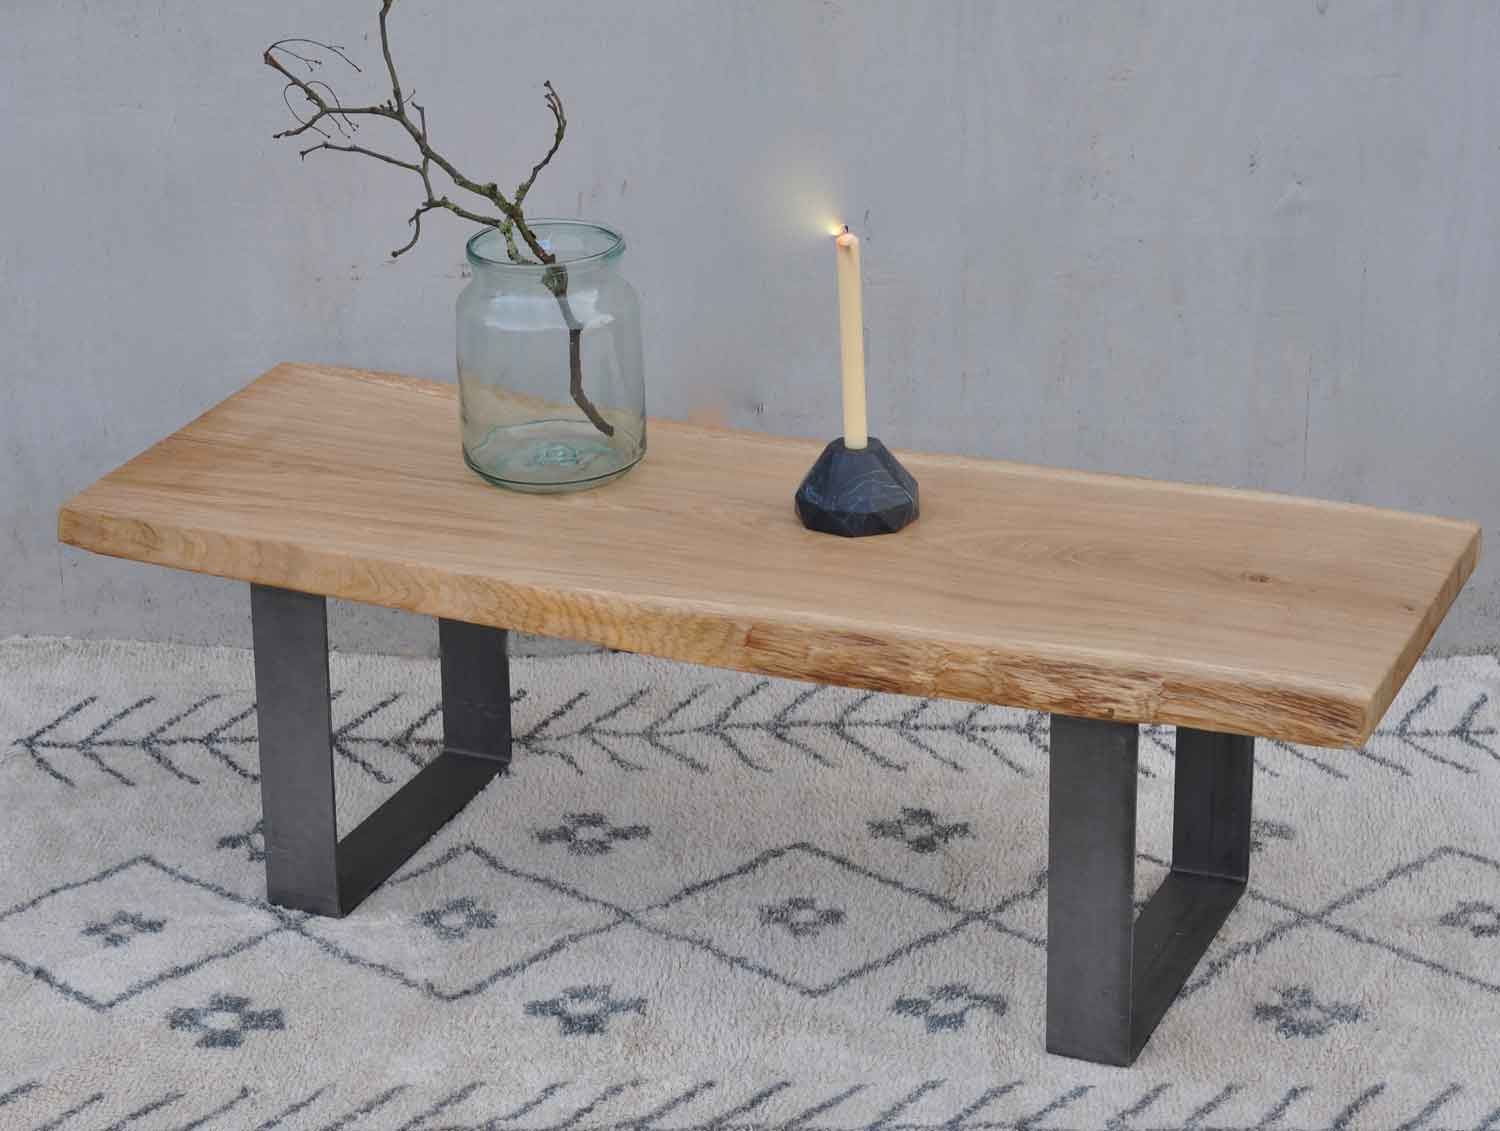 Live Edge Solid Oak Coffee Table With Industrial Steel Legs With Rustic Oak And Black Coffee Tables (View 9 of 15)